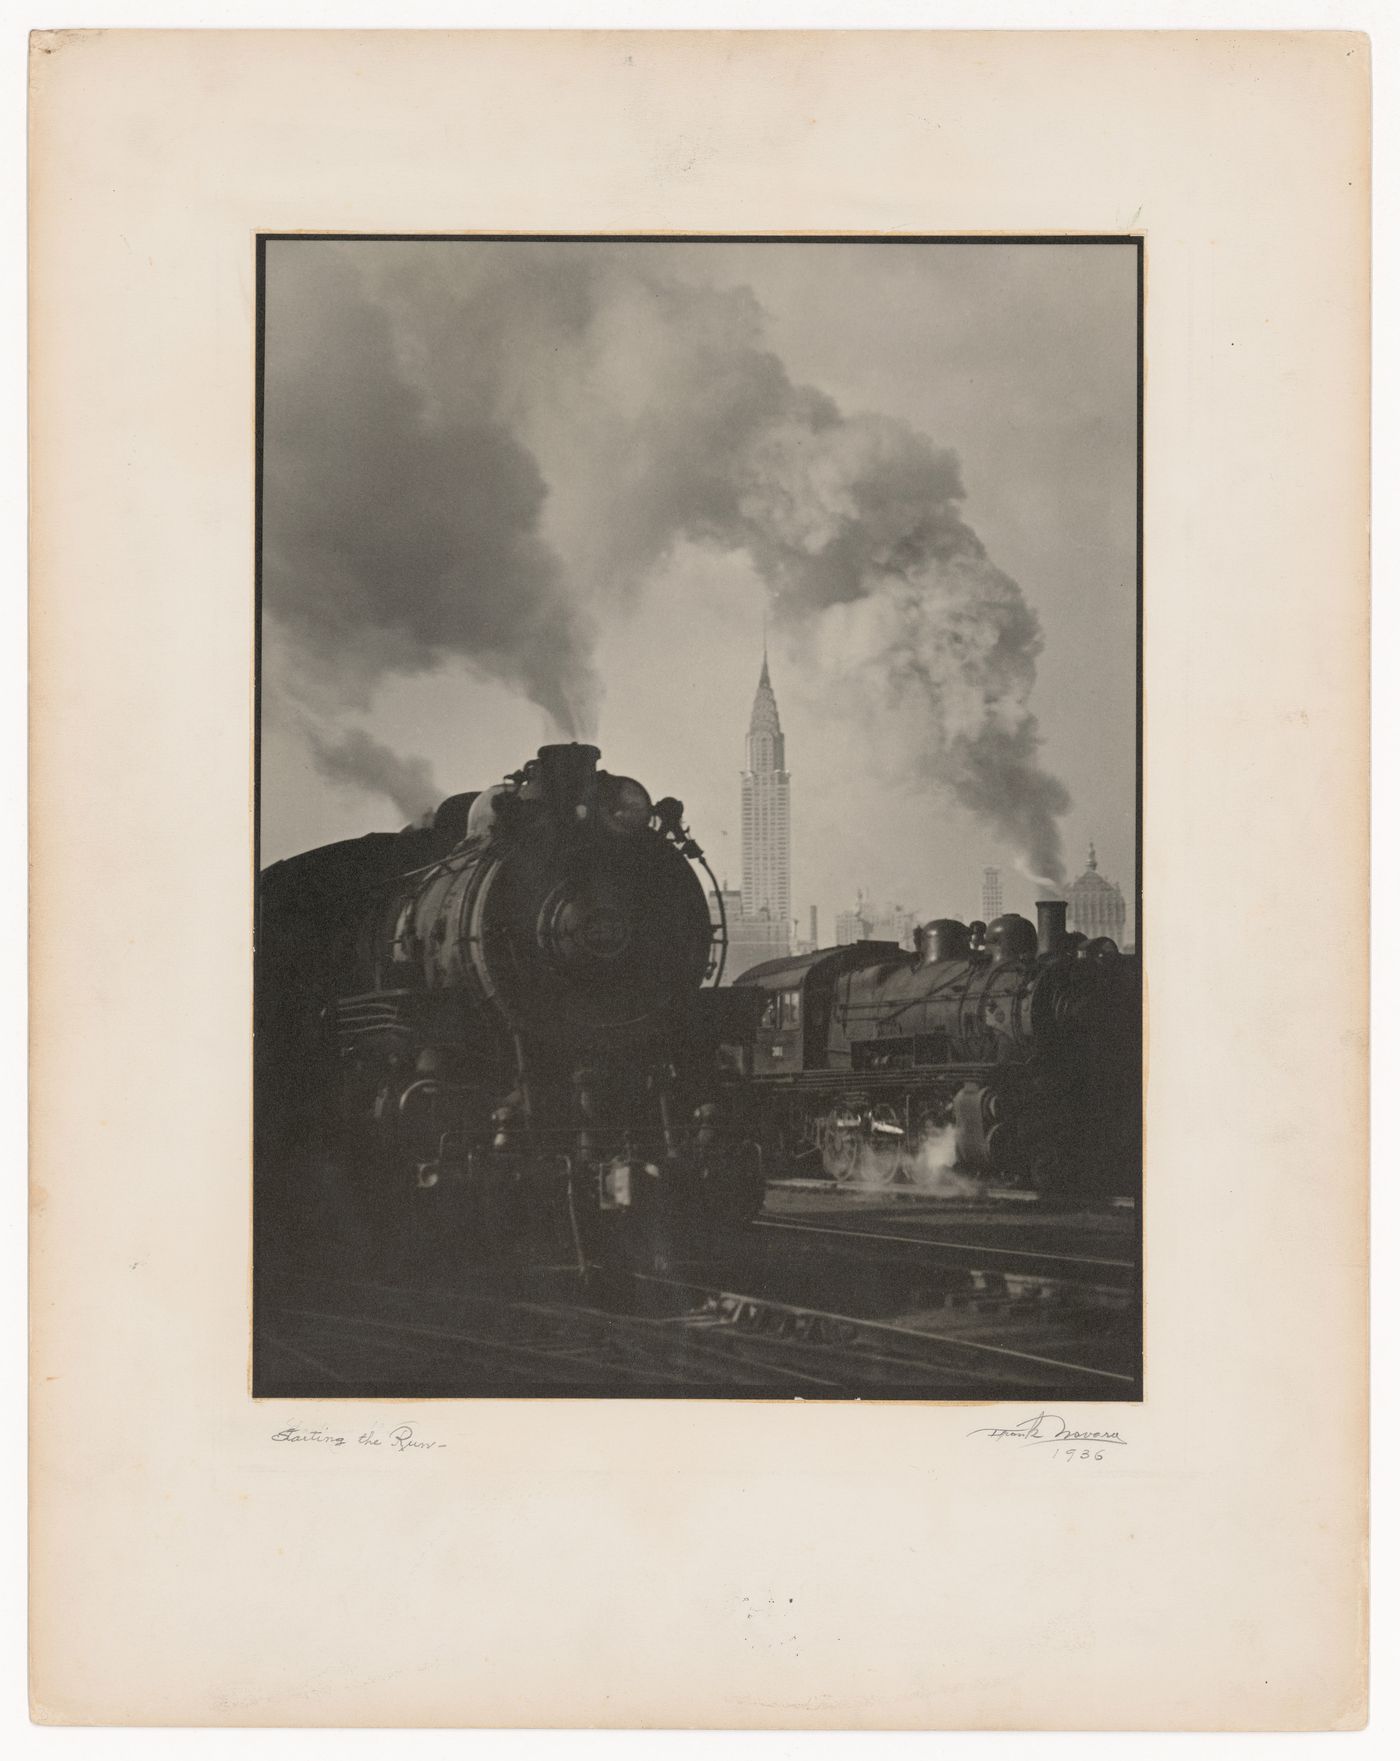 Chrysler Building with locomotives in foreground, Manhattan, New York City, New York